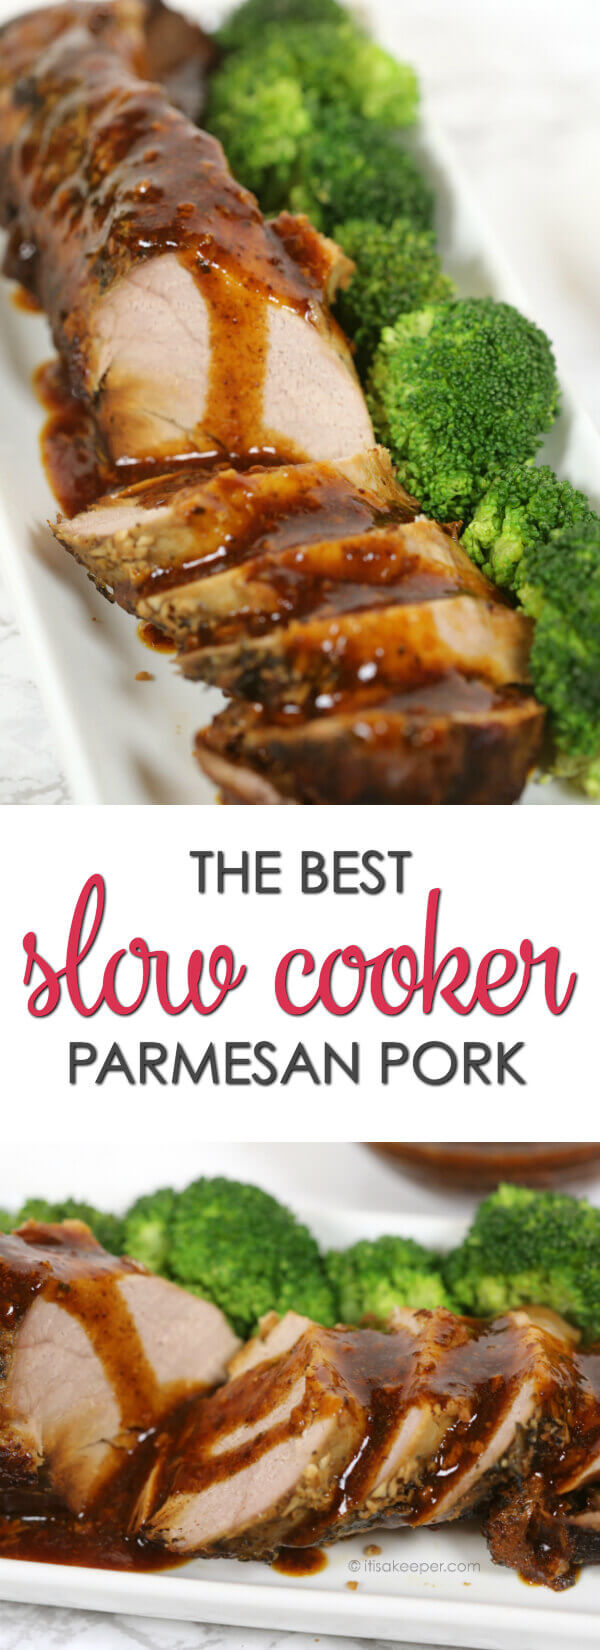 Slow Cooker Parmesan Pork - this crock pot recipe is ultra tender and it makes a thick, rich sauce. It’s one of my favorite slow cooker recipes pork